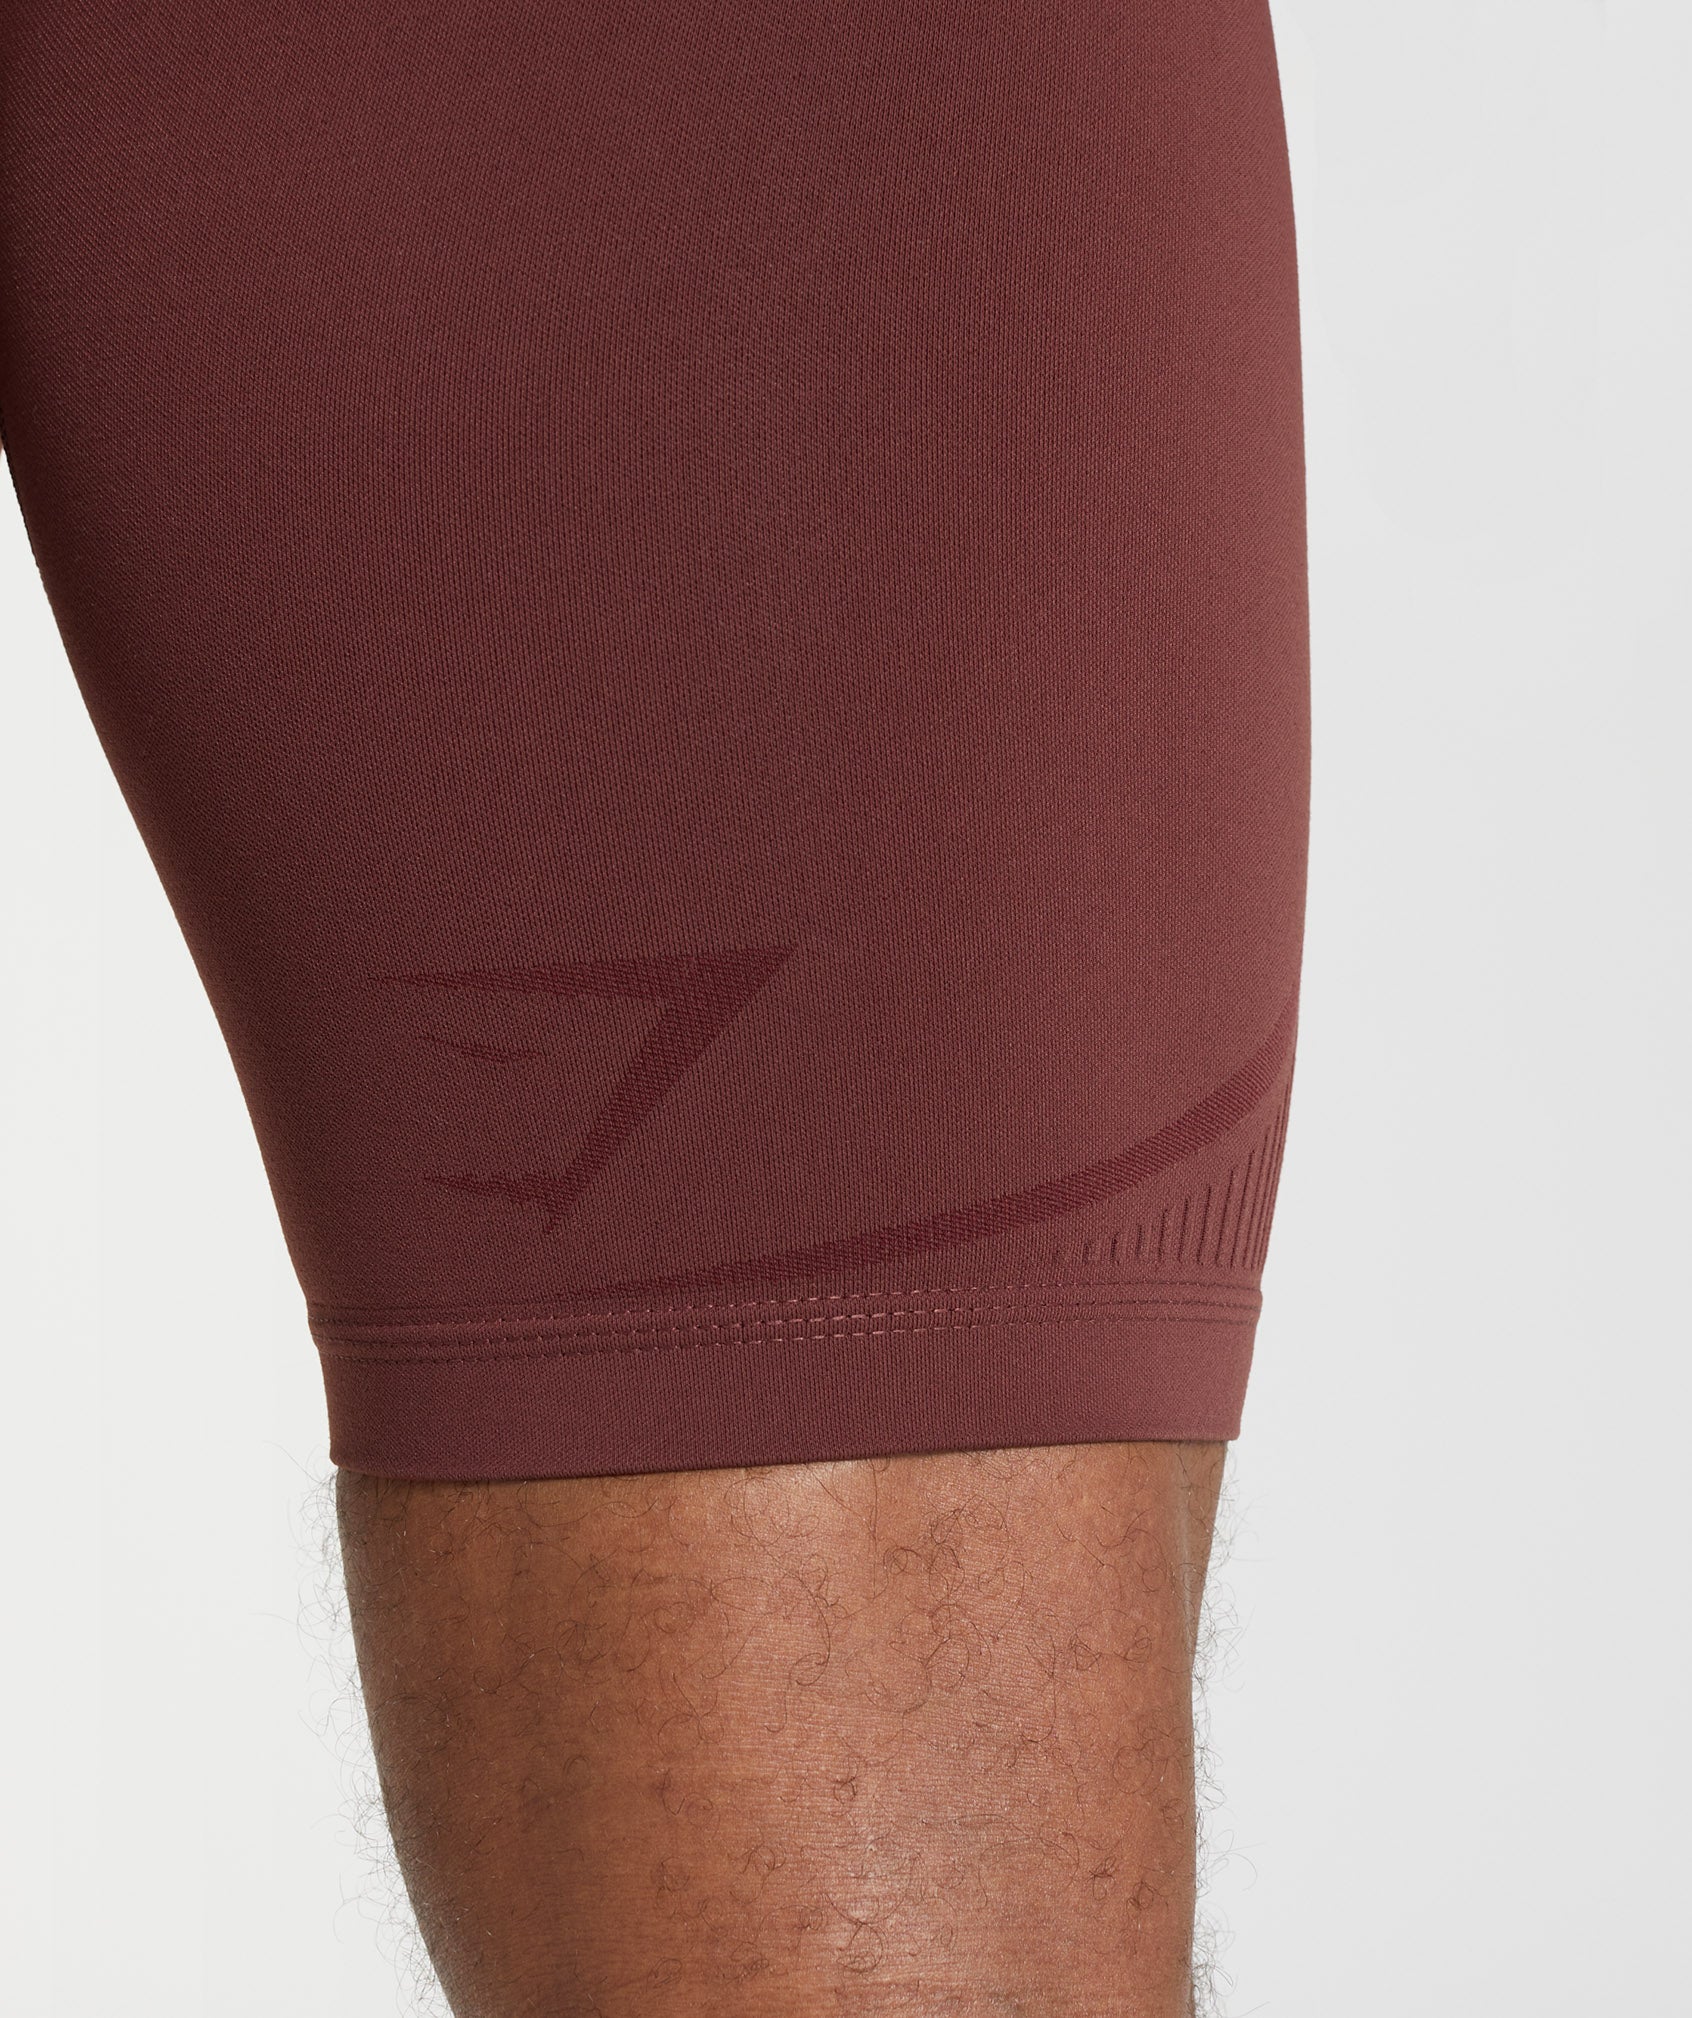 315 Seamless 1/2 Shorts in Cherry Brown/Athletic Maroon